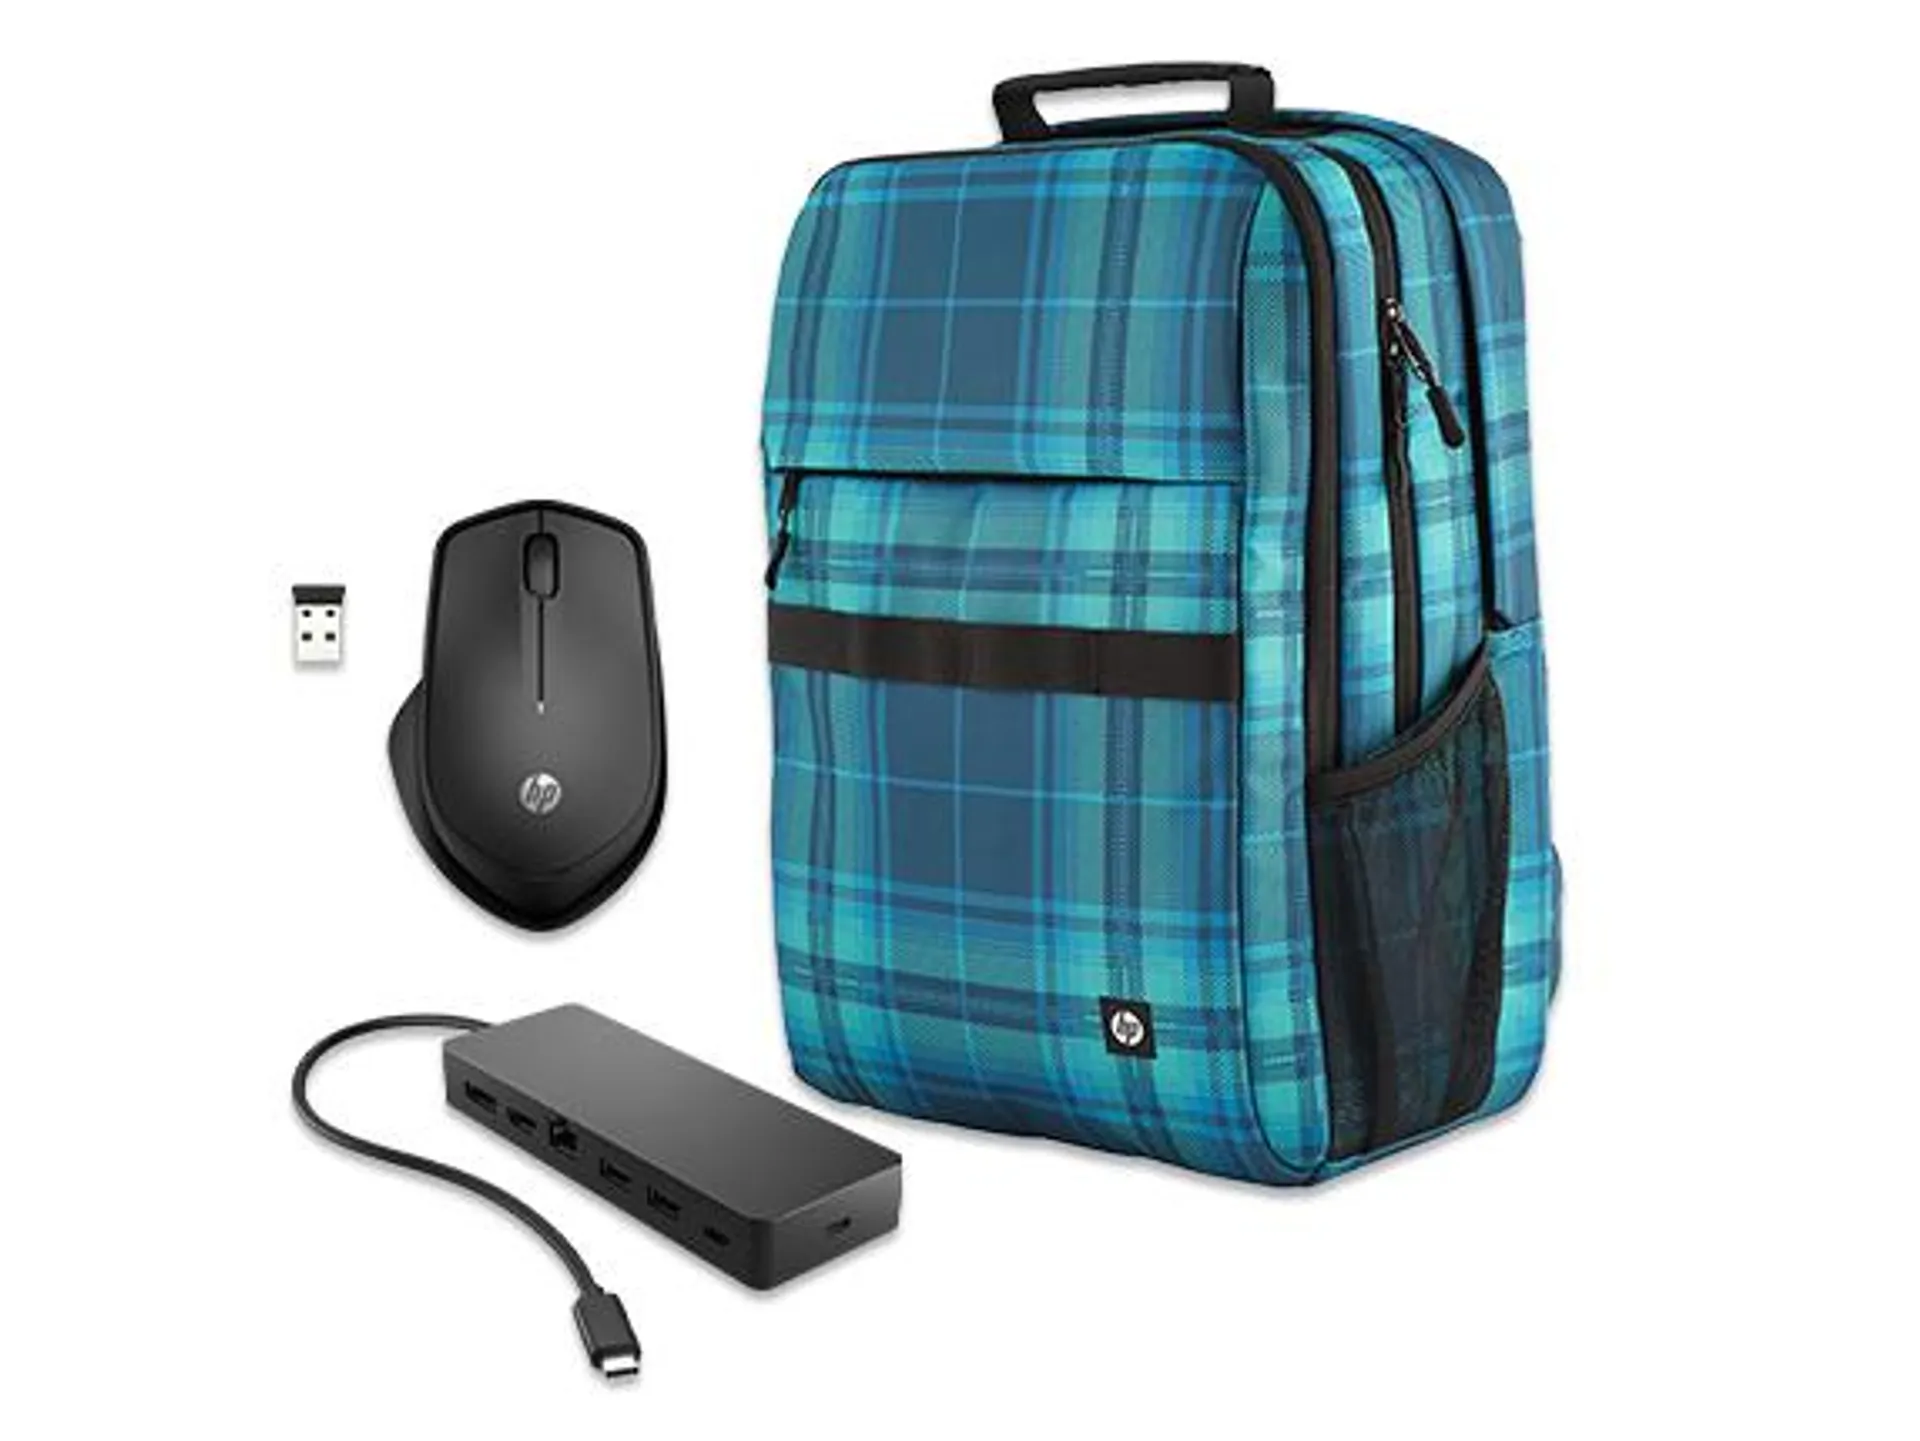 HP USB-C Hub, Wireless Mouse and Plaid Backpack Bundle for Campus